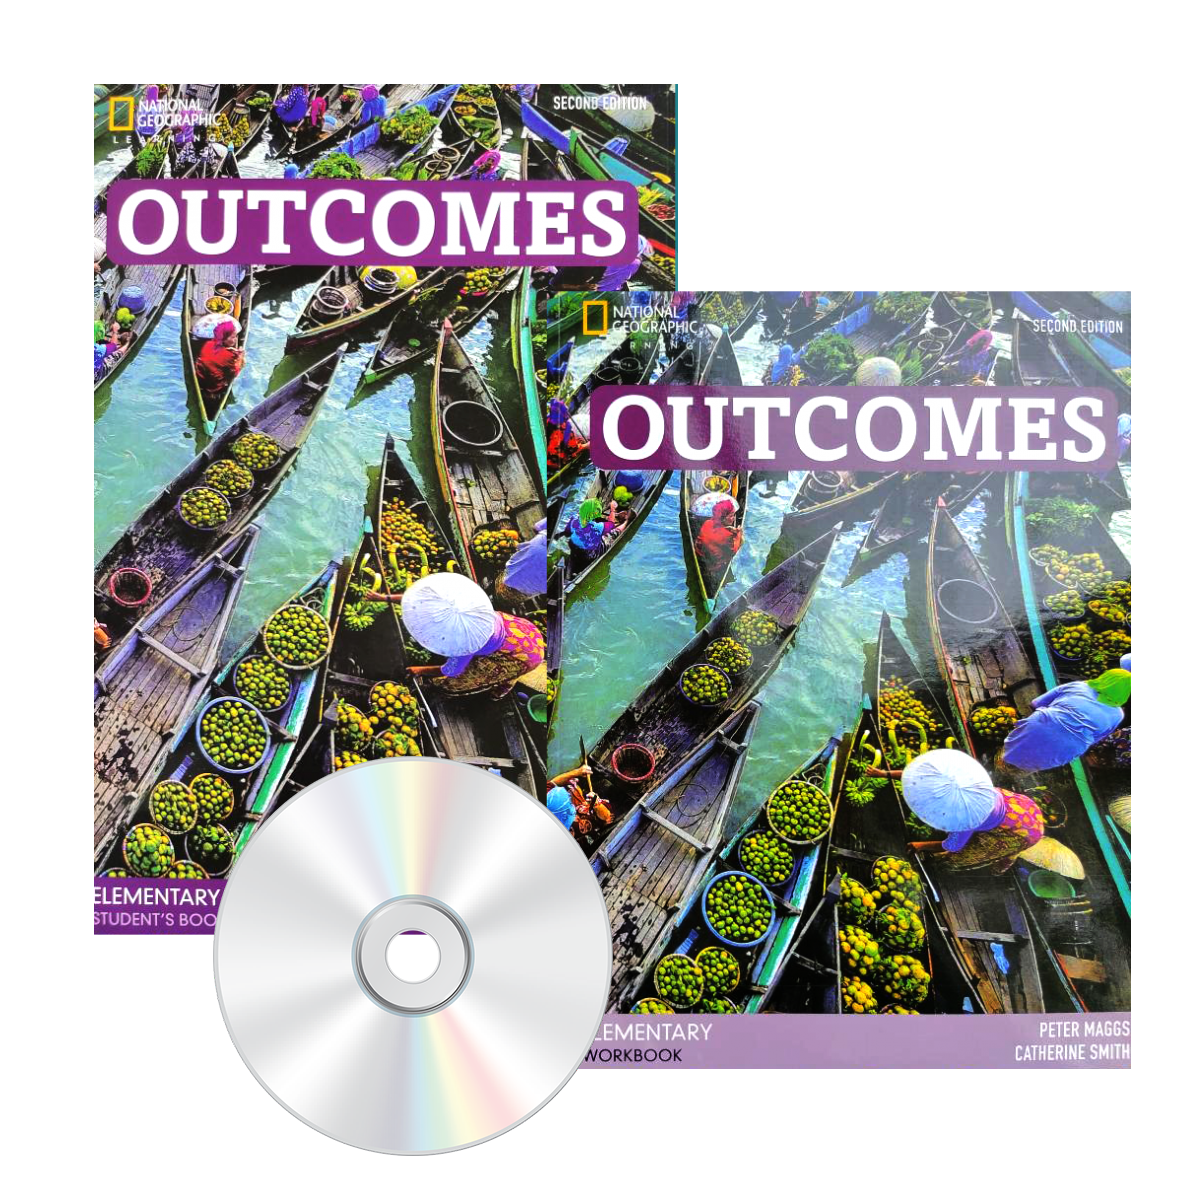 Outcomes Elementary. Outcomes Elementary student's book. Outcomes Elementary 1st Edition. Outcomes Elementary student's book ответы. Outcomes elementary student s